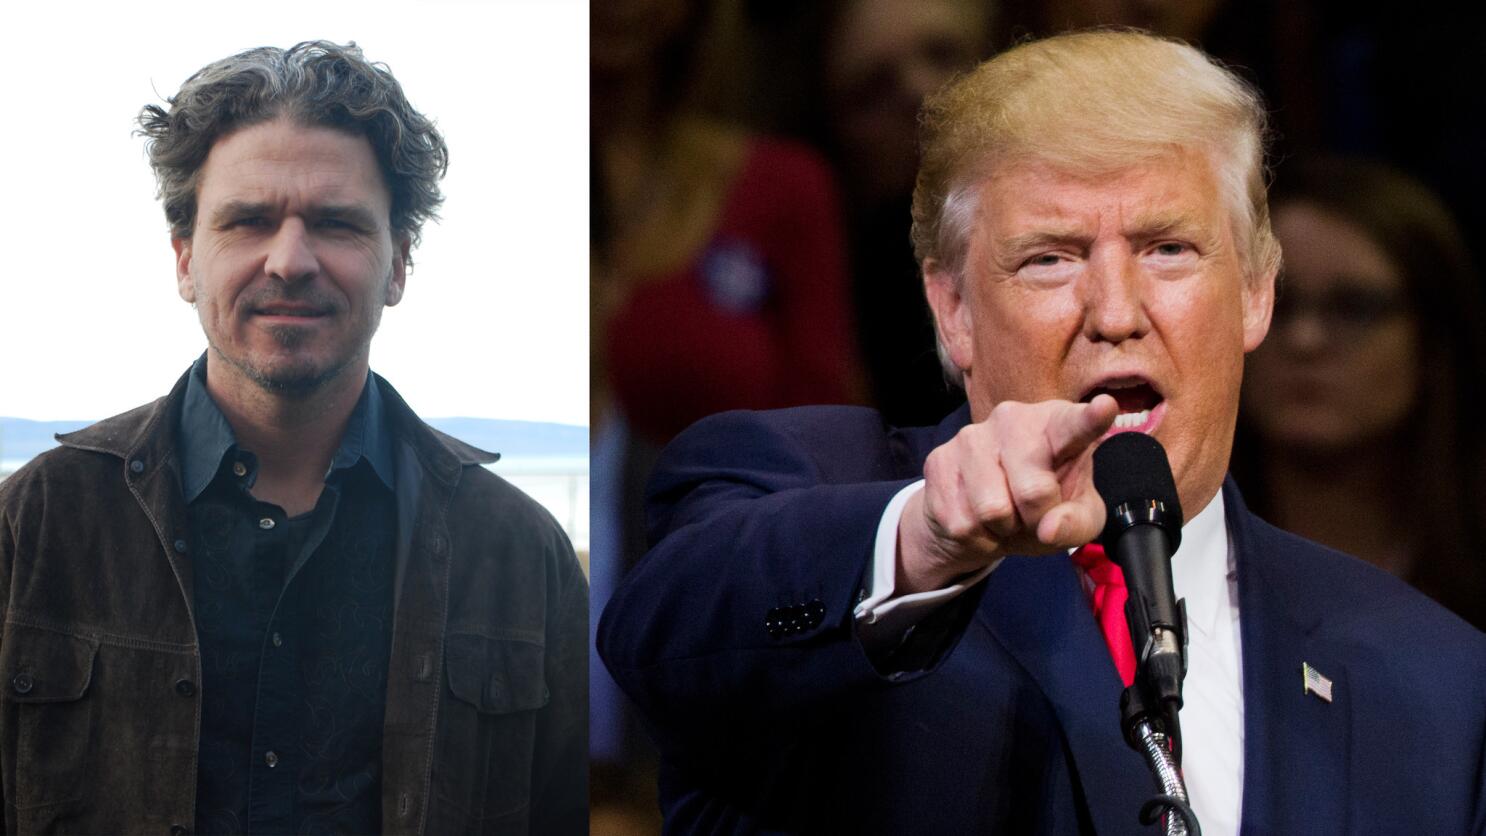 Could he actually win?' Dave Eggers at a Donald Trump rally, Books